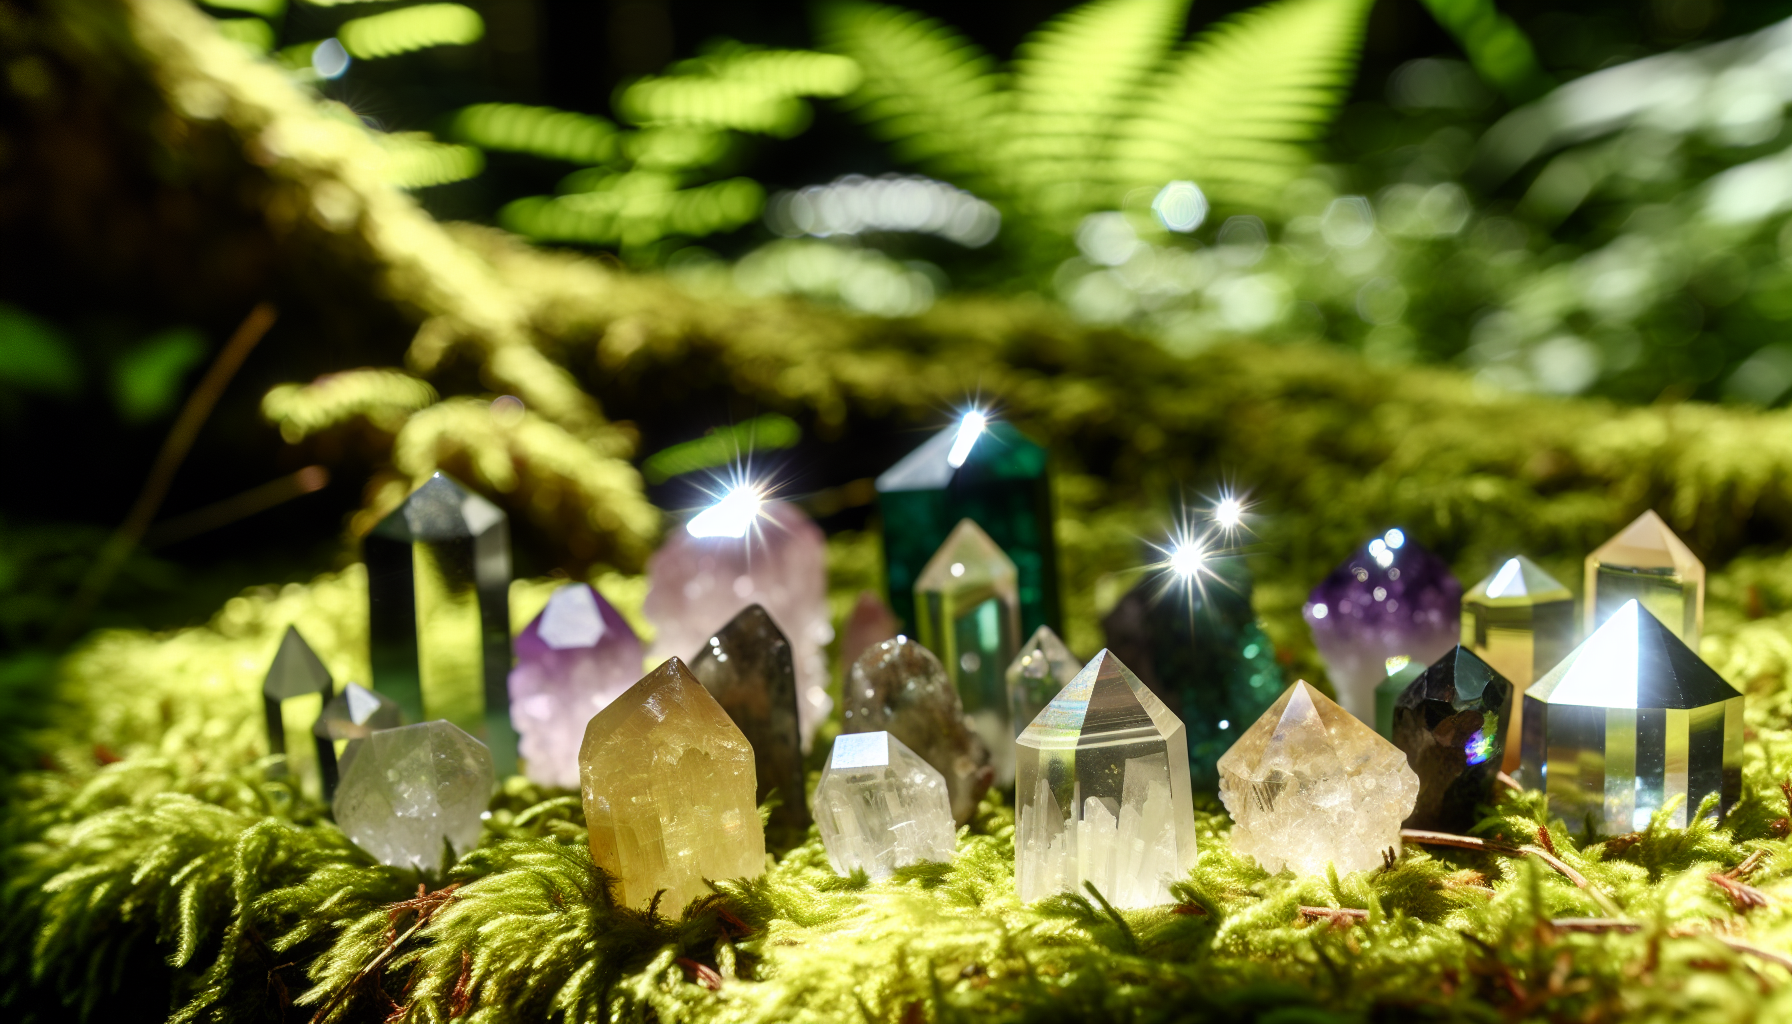 Crystals basking in sunlight in a natural setting